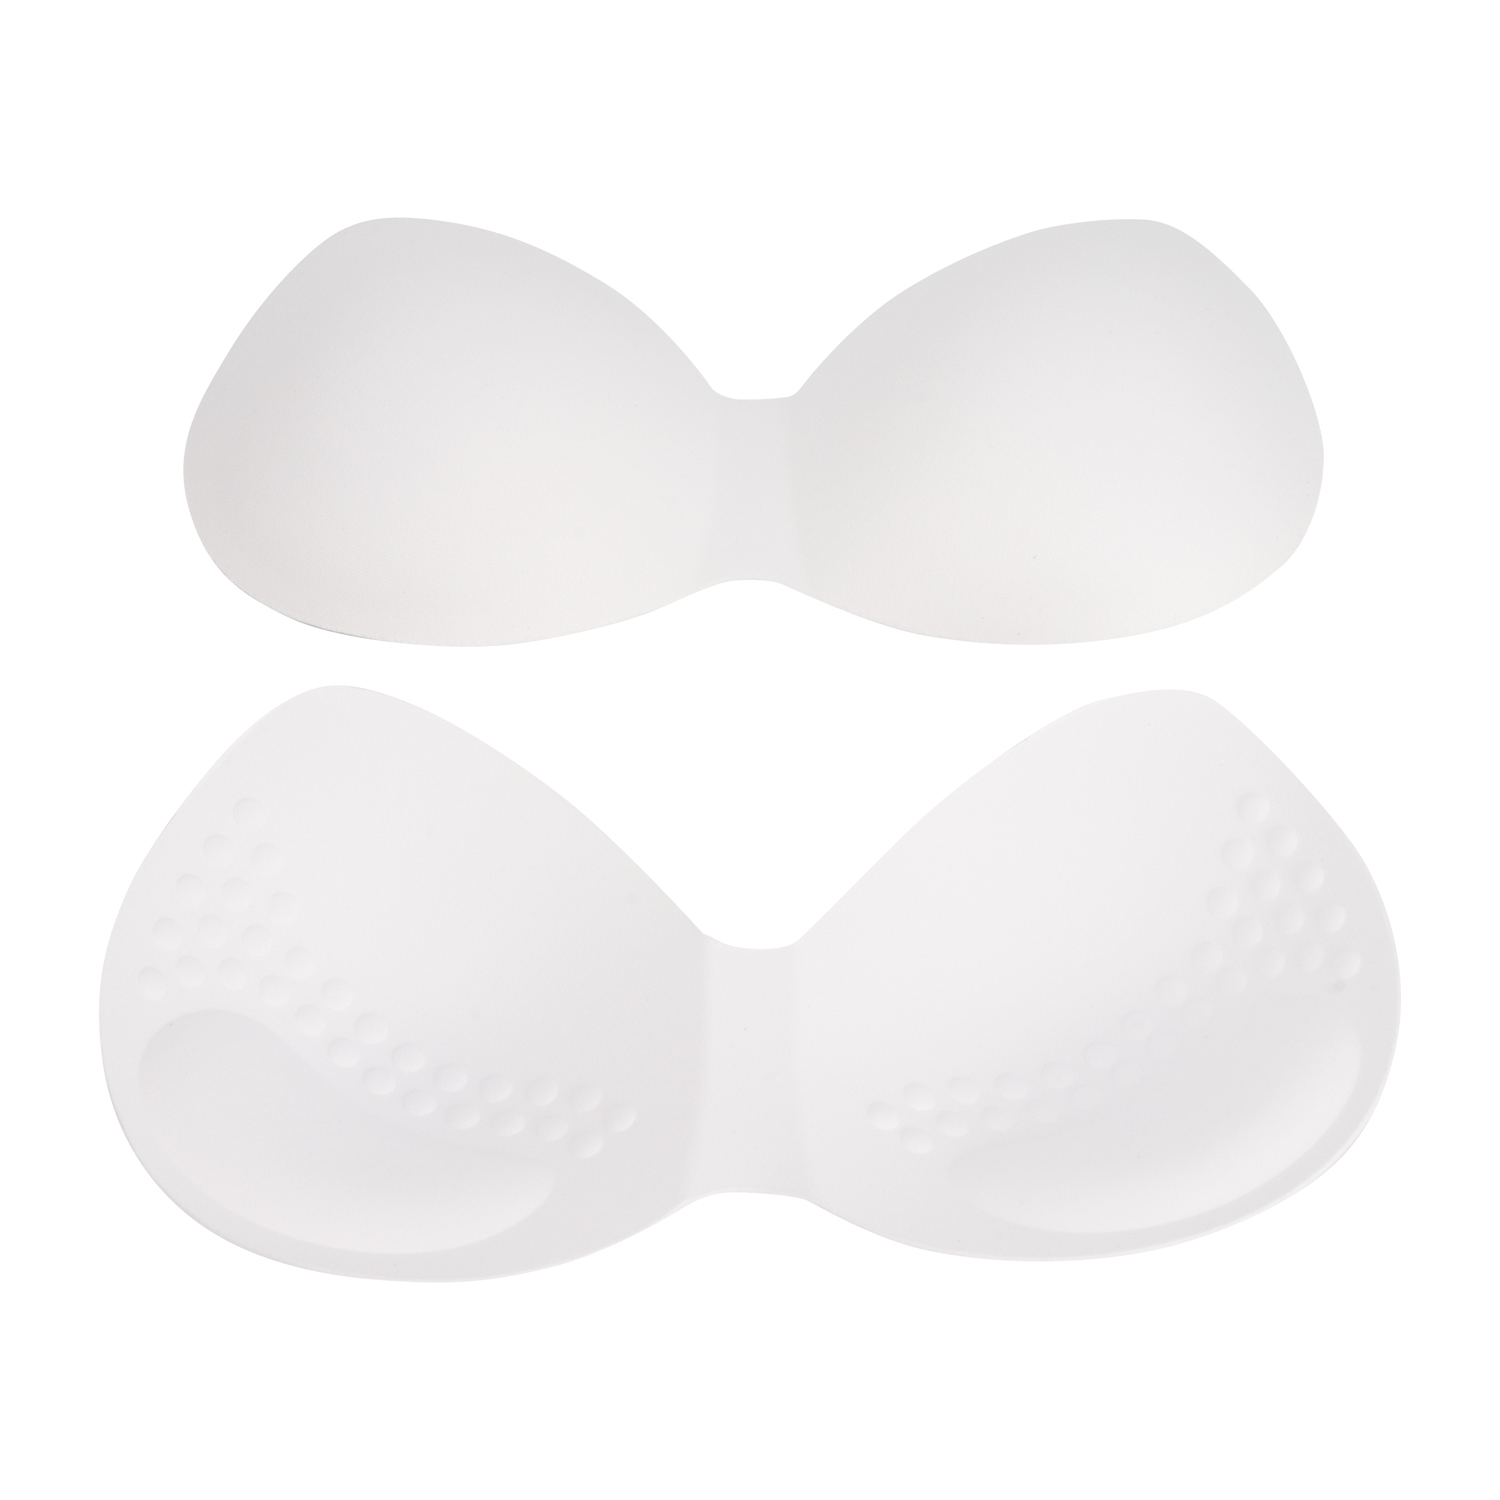 Pink Color Conjoined Breathable And Absorbent Foam Bra Cup 